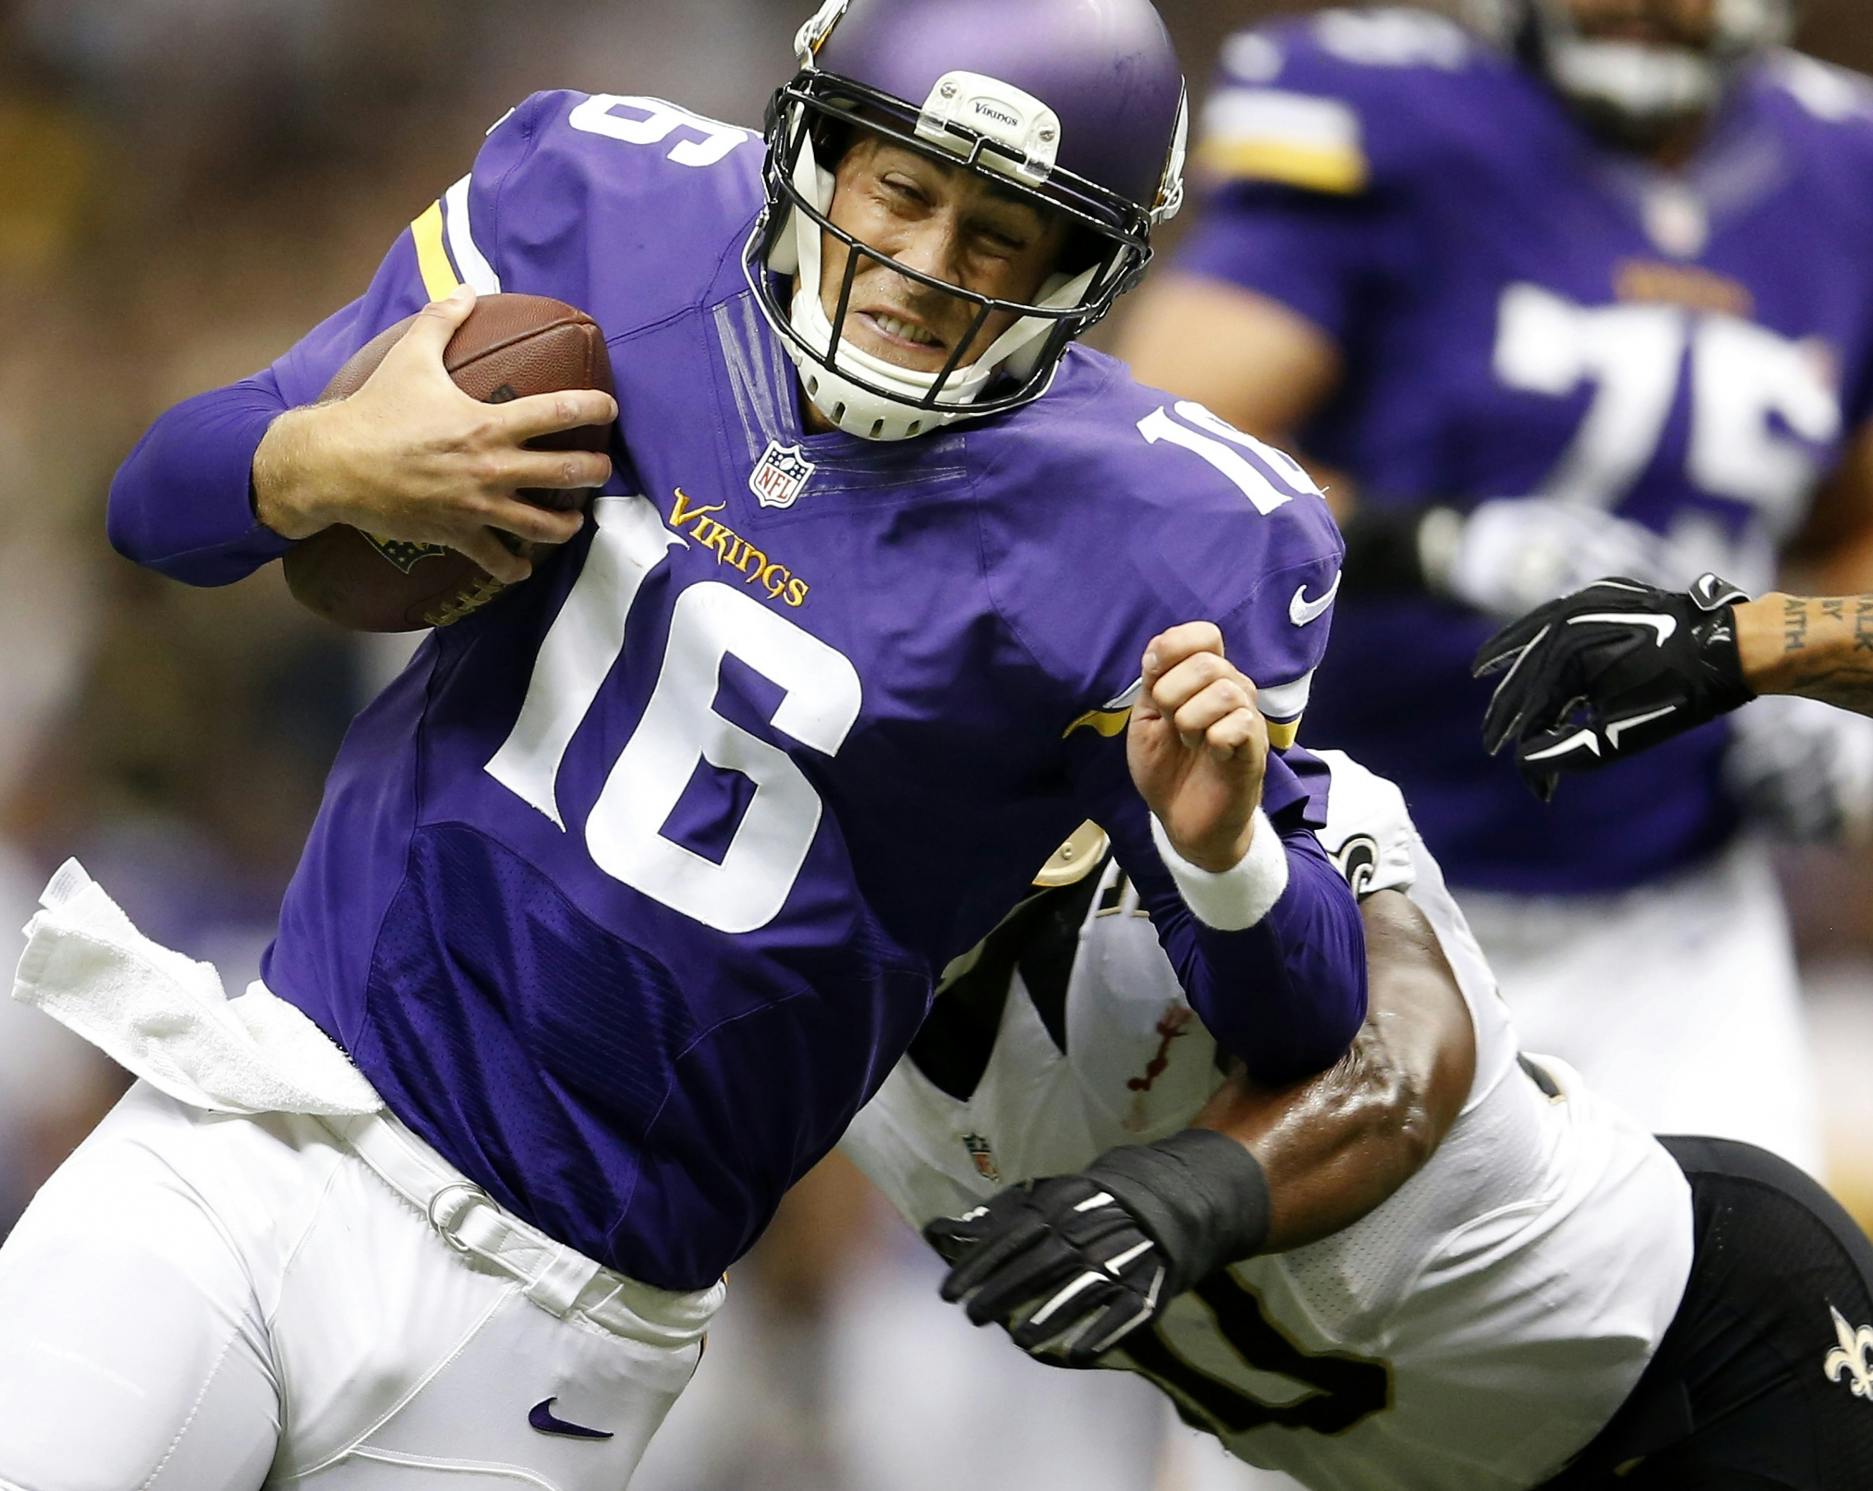 Several Vikings starters have suffered injuries. Quarterback Matt Cassel and right guard Brandon Fusco are done for the year, the team announced Wednesday.